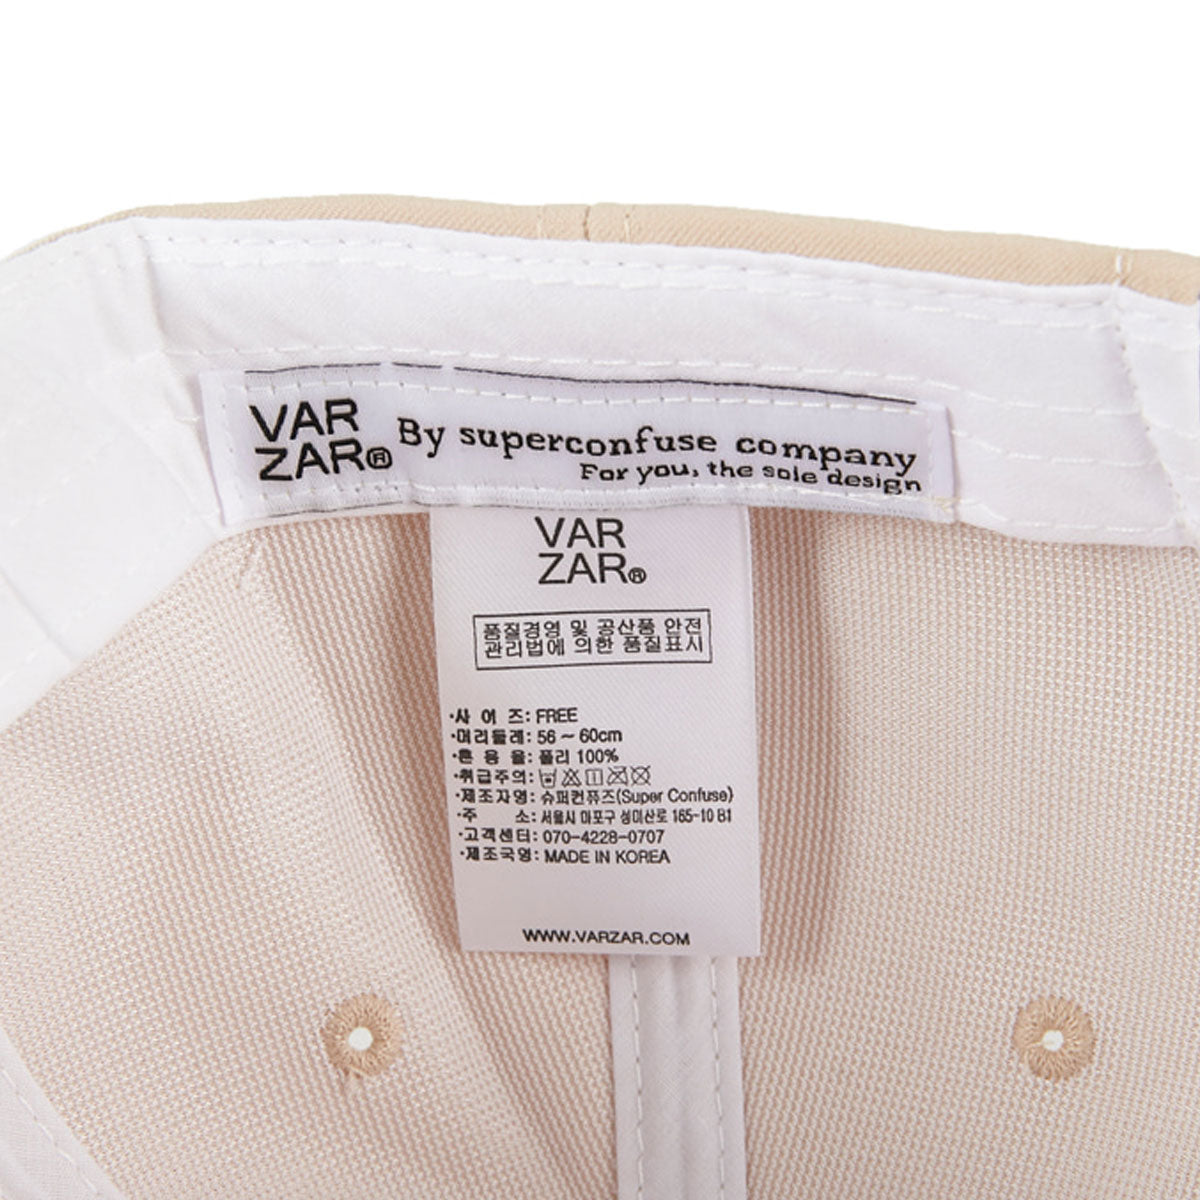 VARZAR - SILVER STUD OVER FIT BALL CAP BEIGE [VZR4-0006]